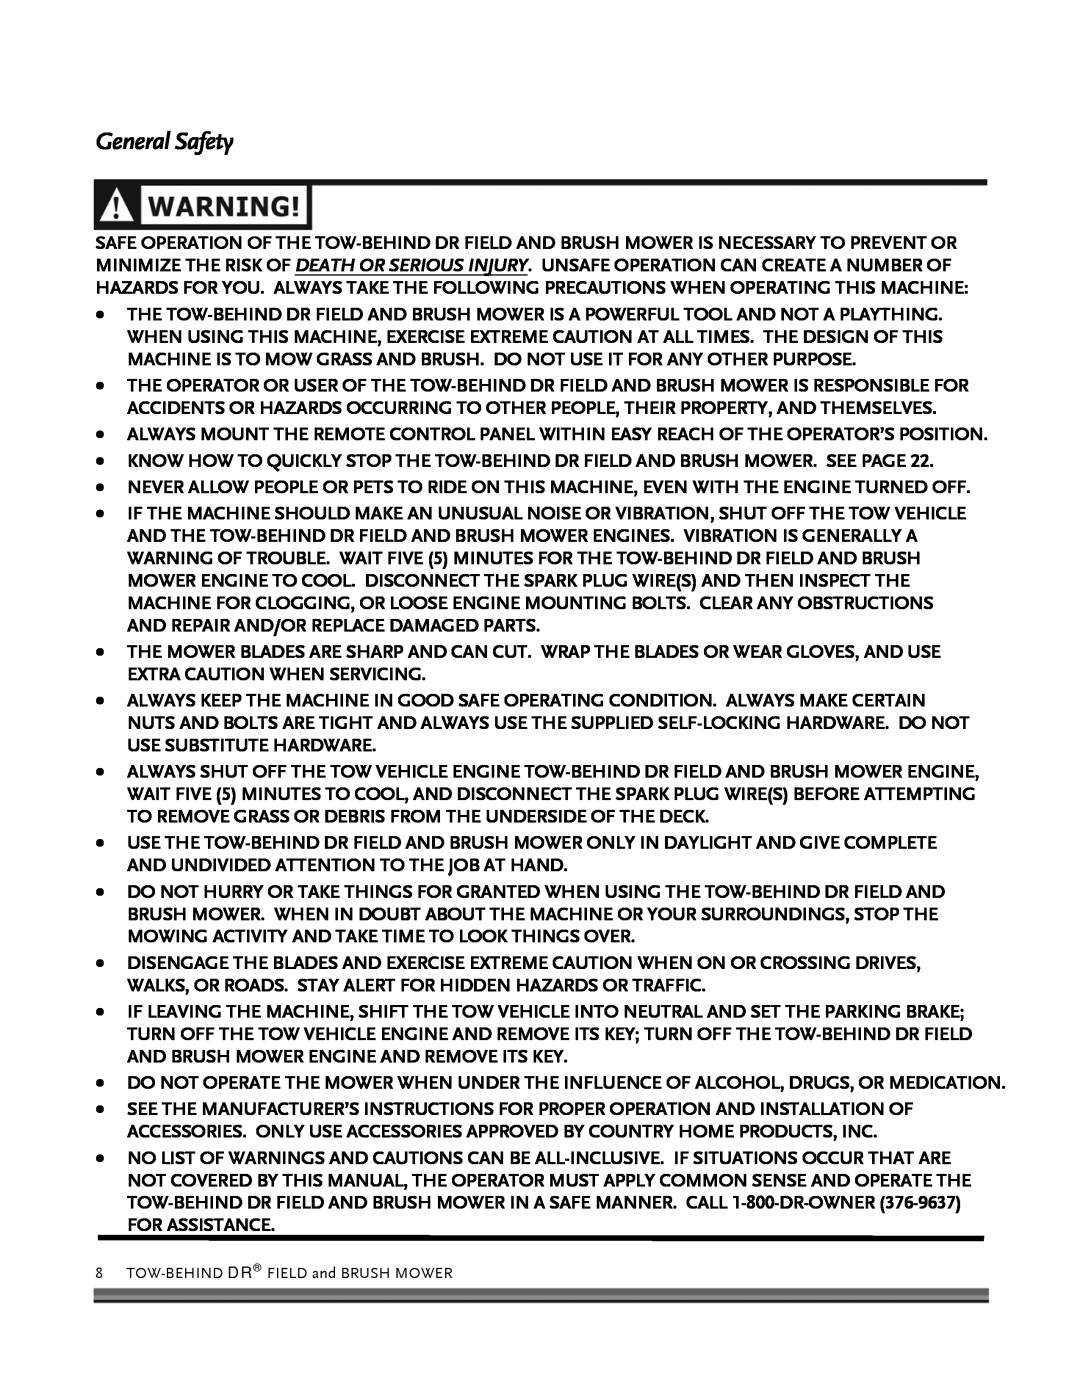 Briggs & Stratton FIELD and BRUSH MOWER manual General Safety 